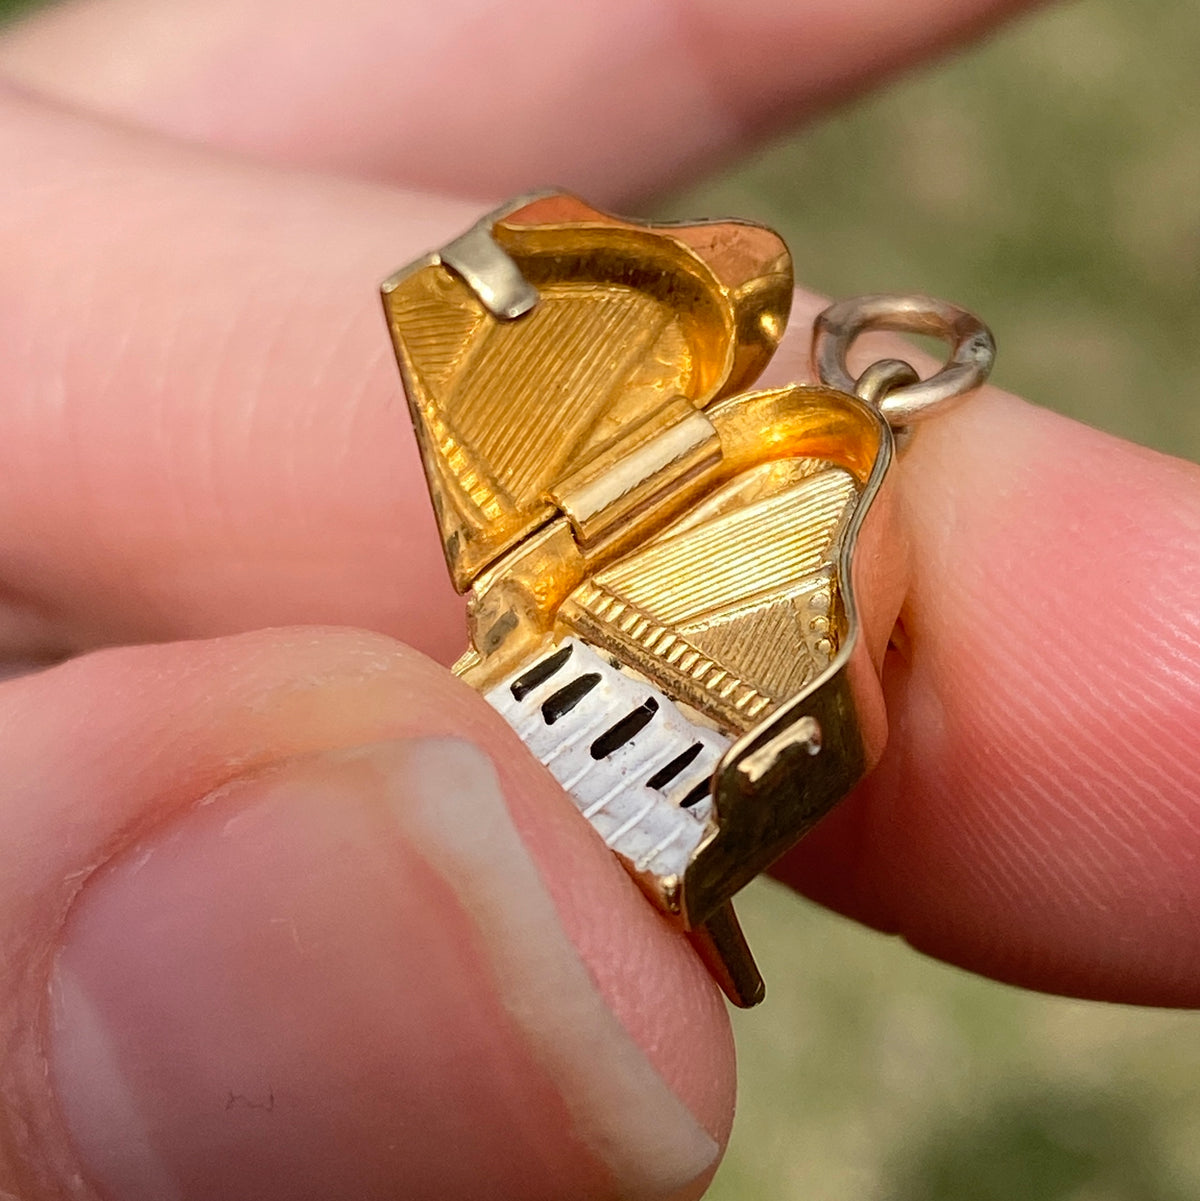 Vintage 14K Gold and Enamel Articulated Grand Piano Charm